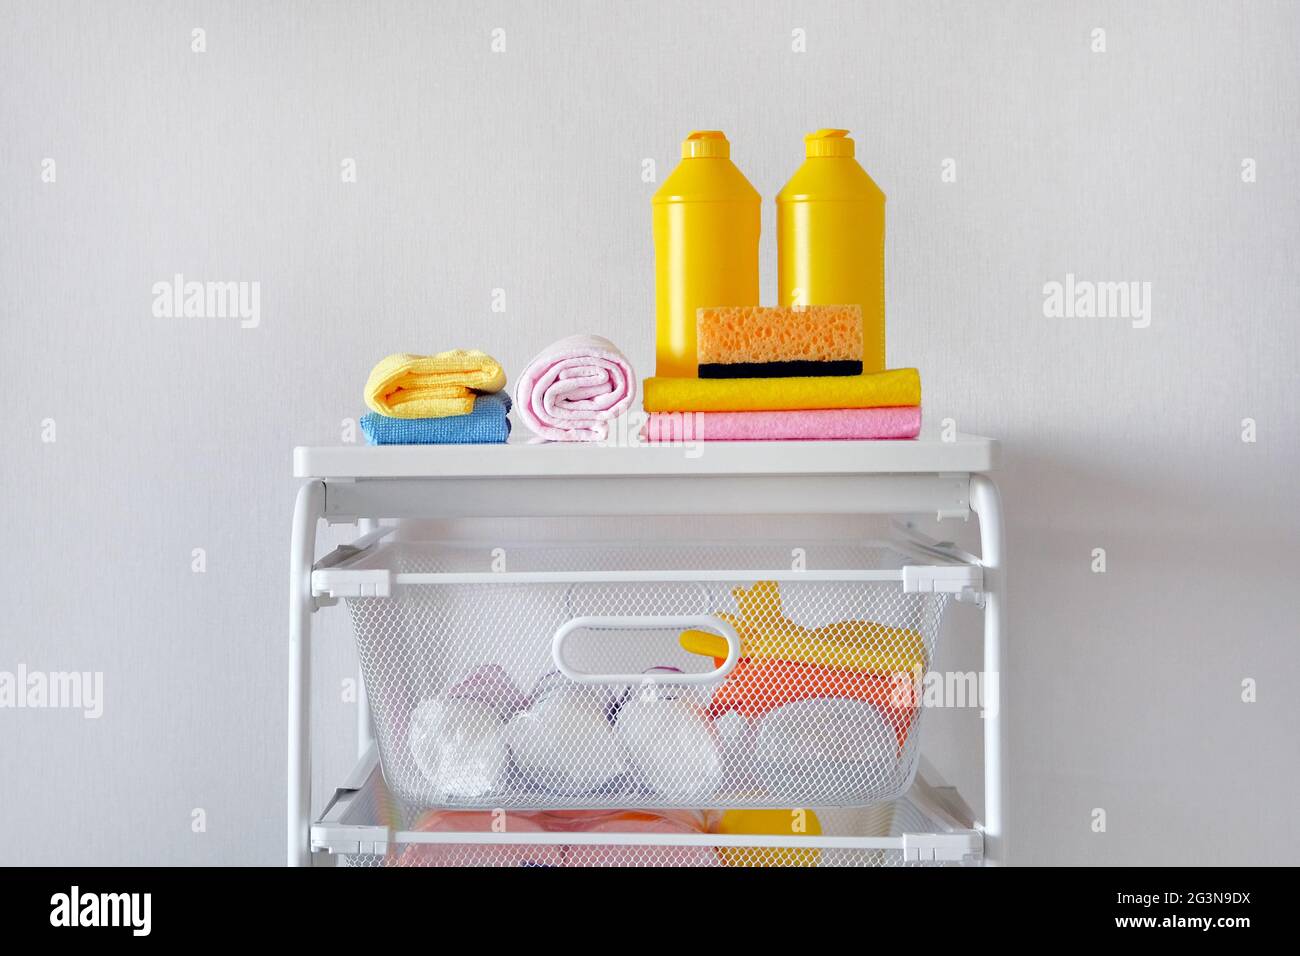 Detergent for cleaning room. Cleaning concept. Yellow plastic bottles with cleaning agent and tools. Regular washing. Stock Photo